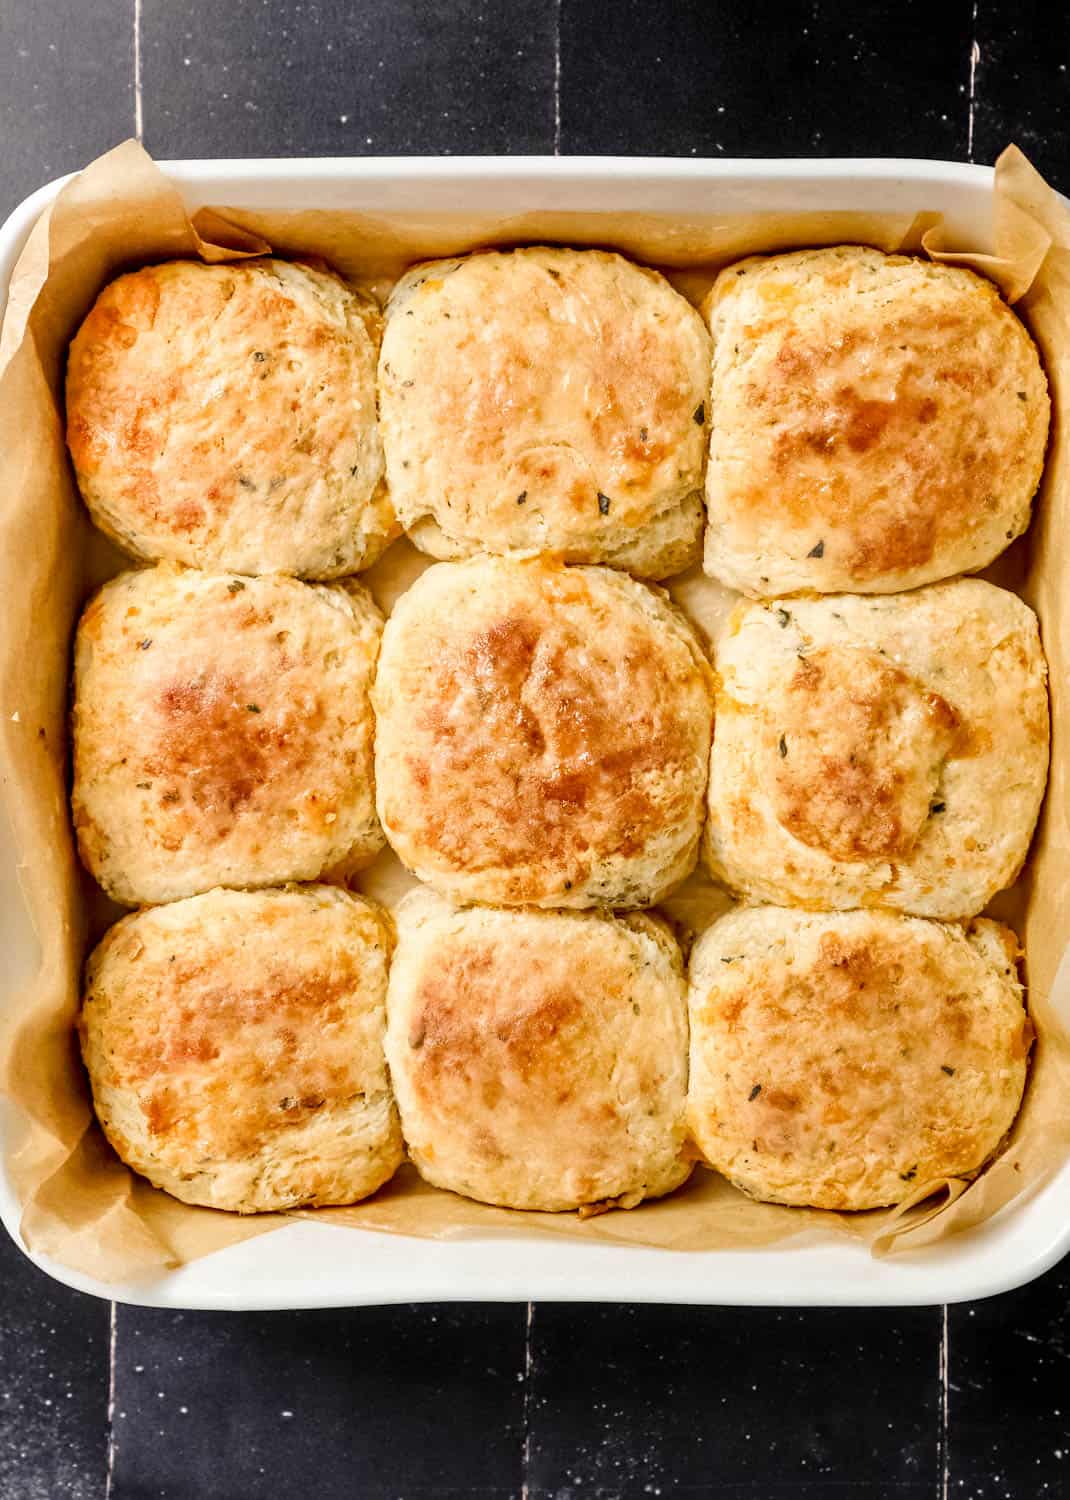 Overhead view of finished biscuits in square parchment lined baking dish on black tile surface. 